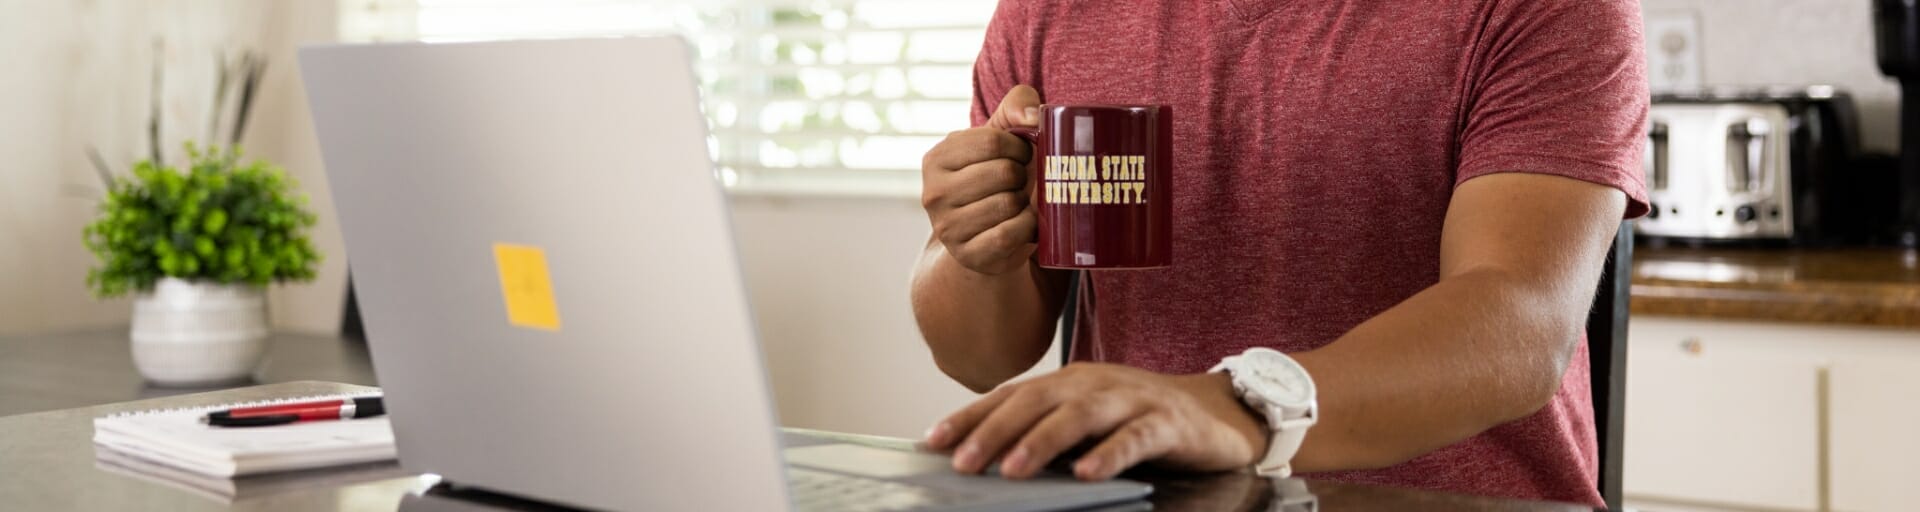 
		student sitting in front of his computer drinking from an ASU coffee mug		